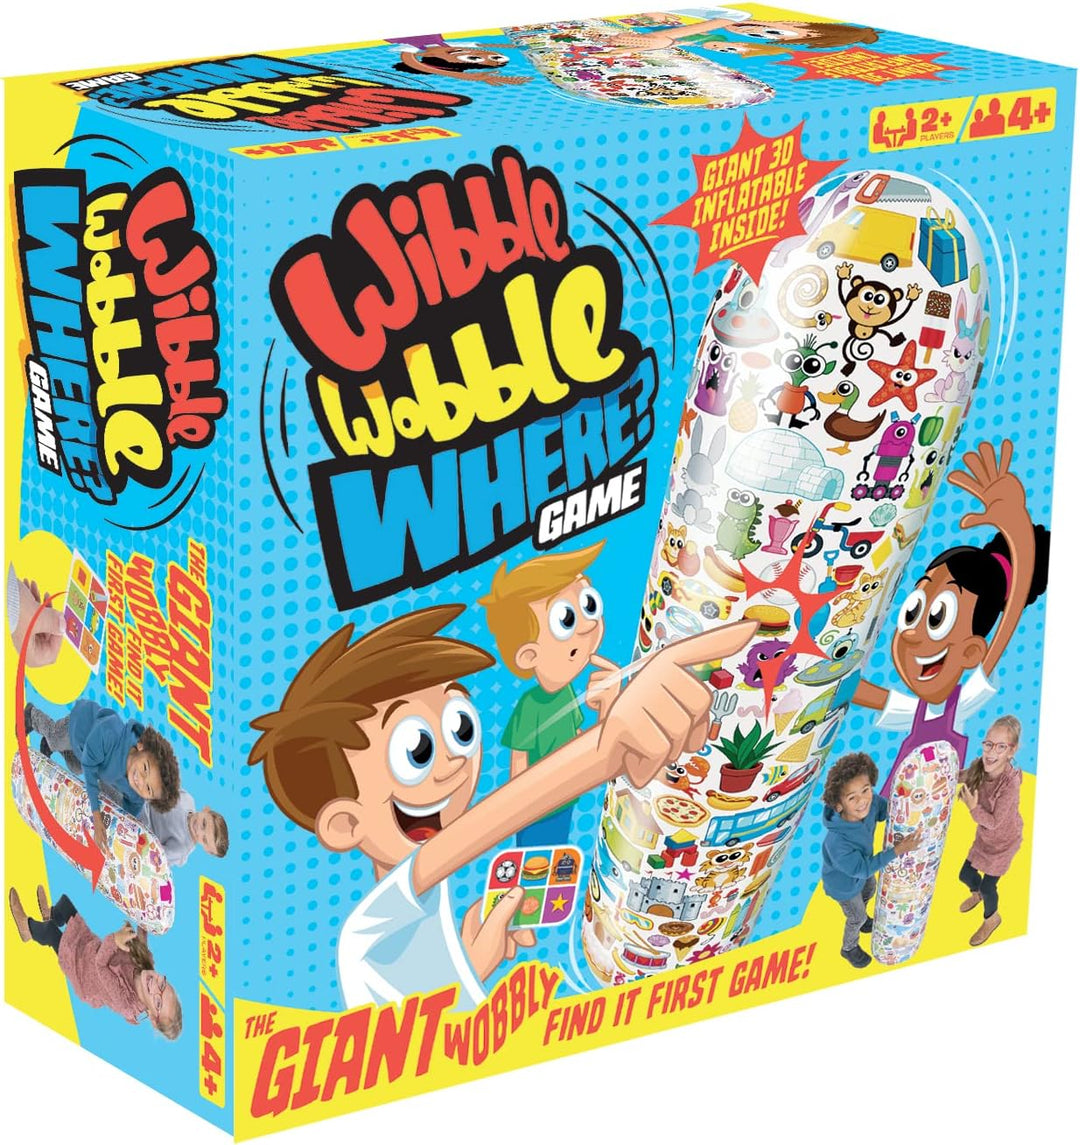 Flair Wibble Wobble Where Game - The Giant Wobbly find-it-first Game